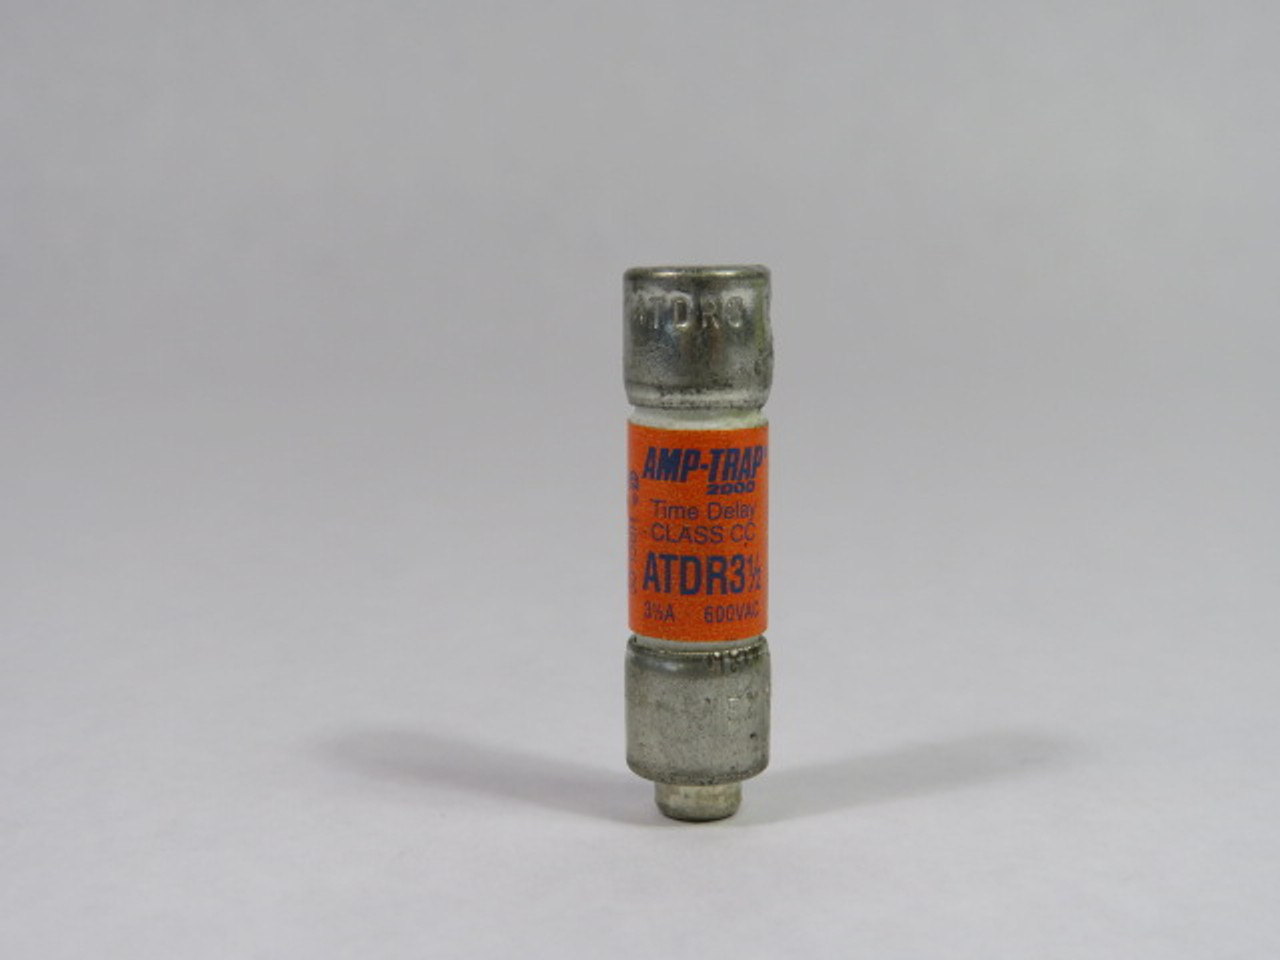 Amp-Trap ATDR3-1/2 Time Delay Fuse 3-1/2A 600V USED